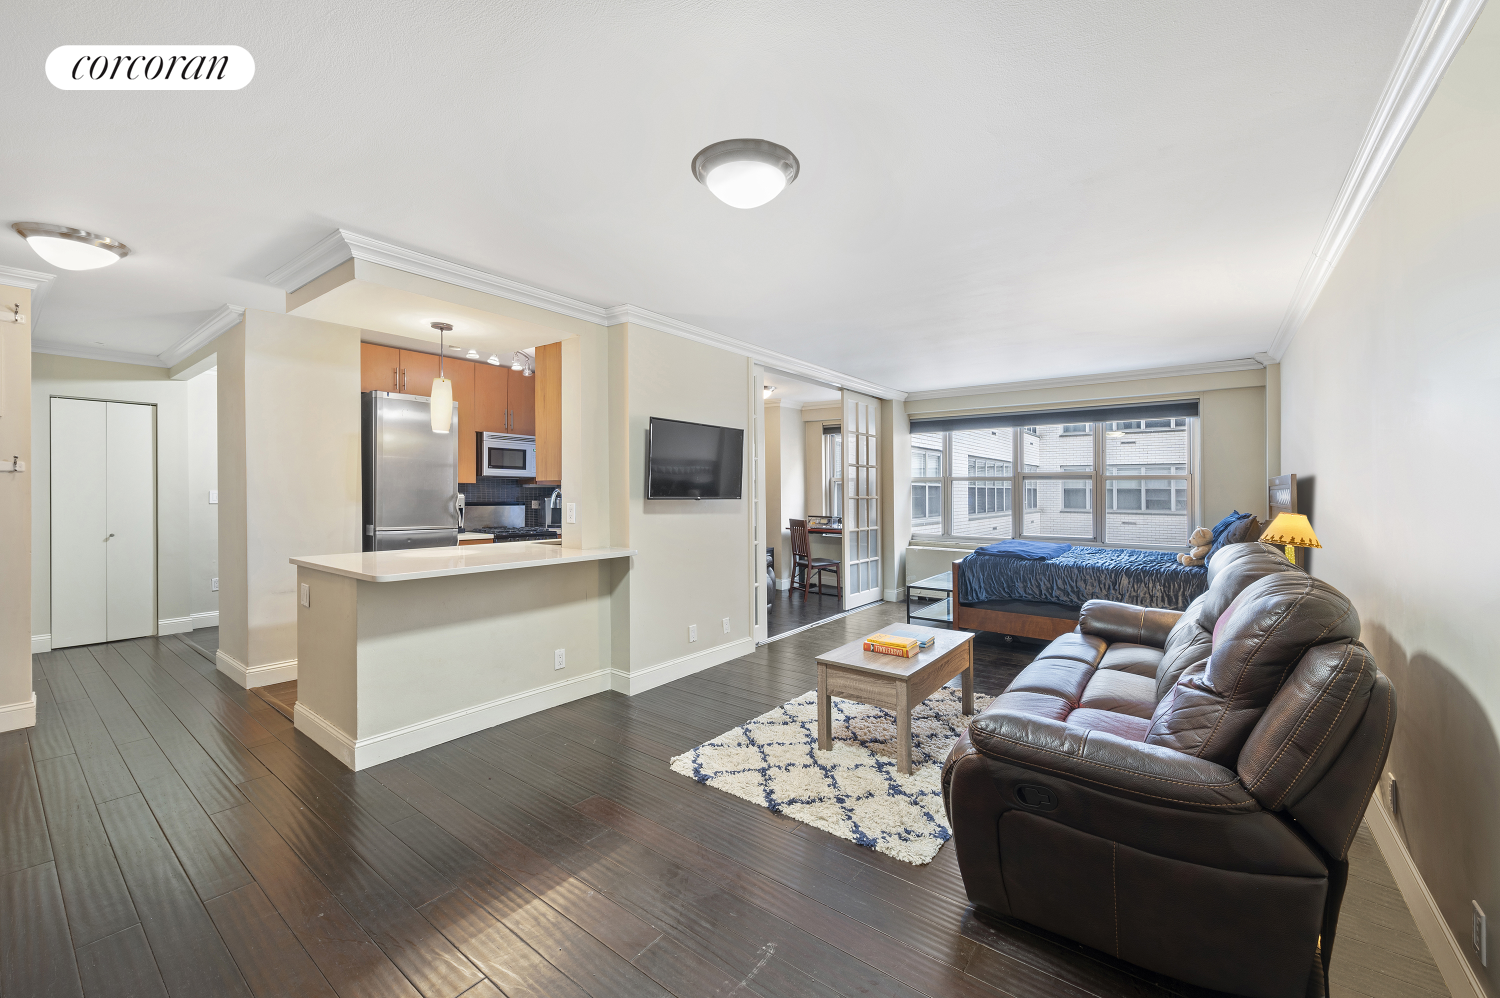 205 3rd Avenue 3B, Gramercy Park, Downtown, NYC - 1 Bathrooms  
3 Rooms - 